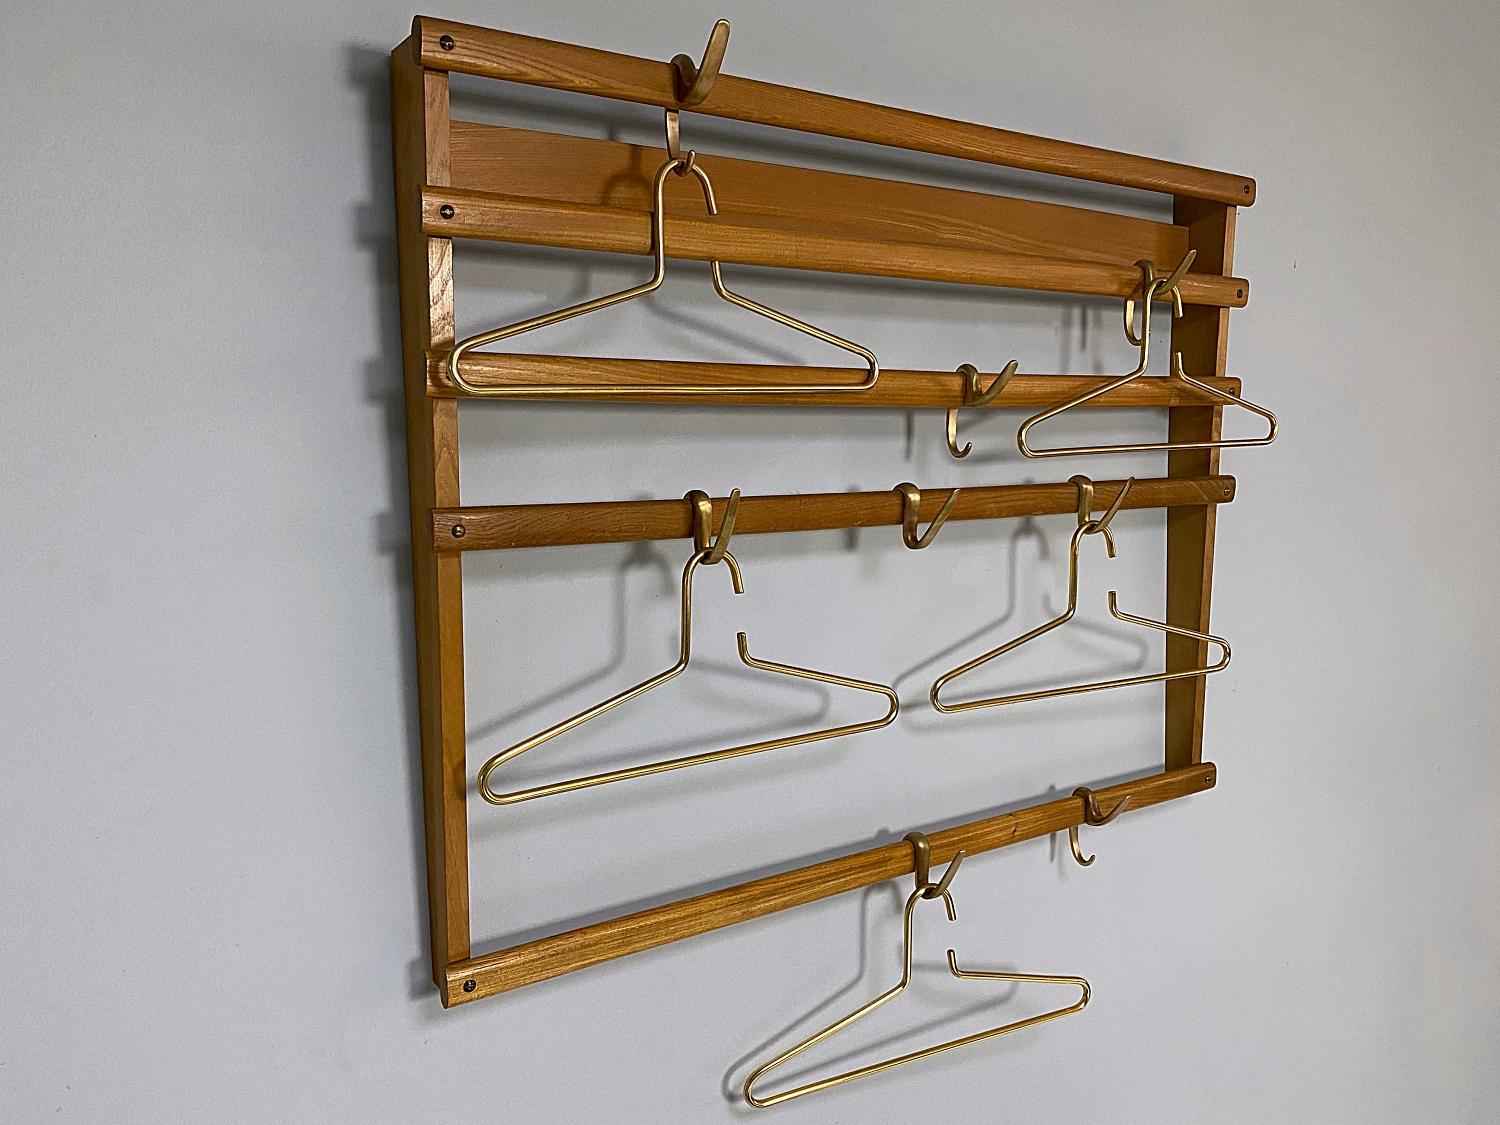 Hand-Crafted Carl Auböck 2 / 40 Midcentury Brass Plated Coat Hangers, No.5714, 1960s, Austria For Sale